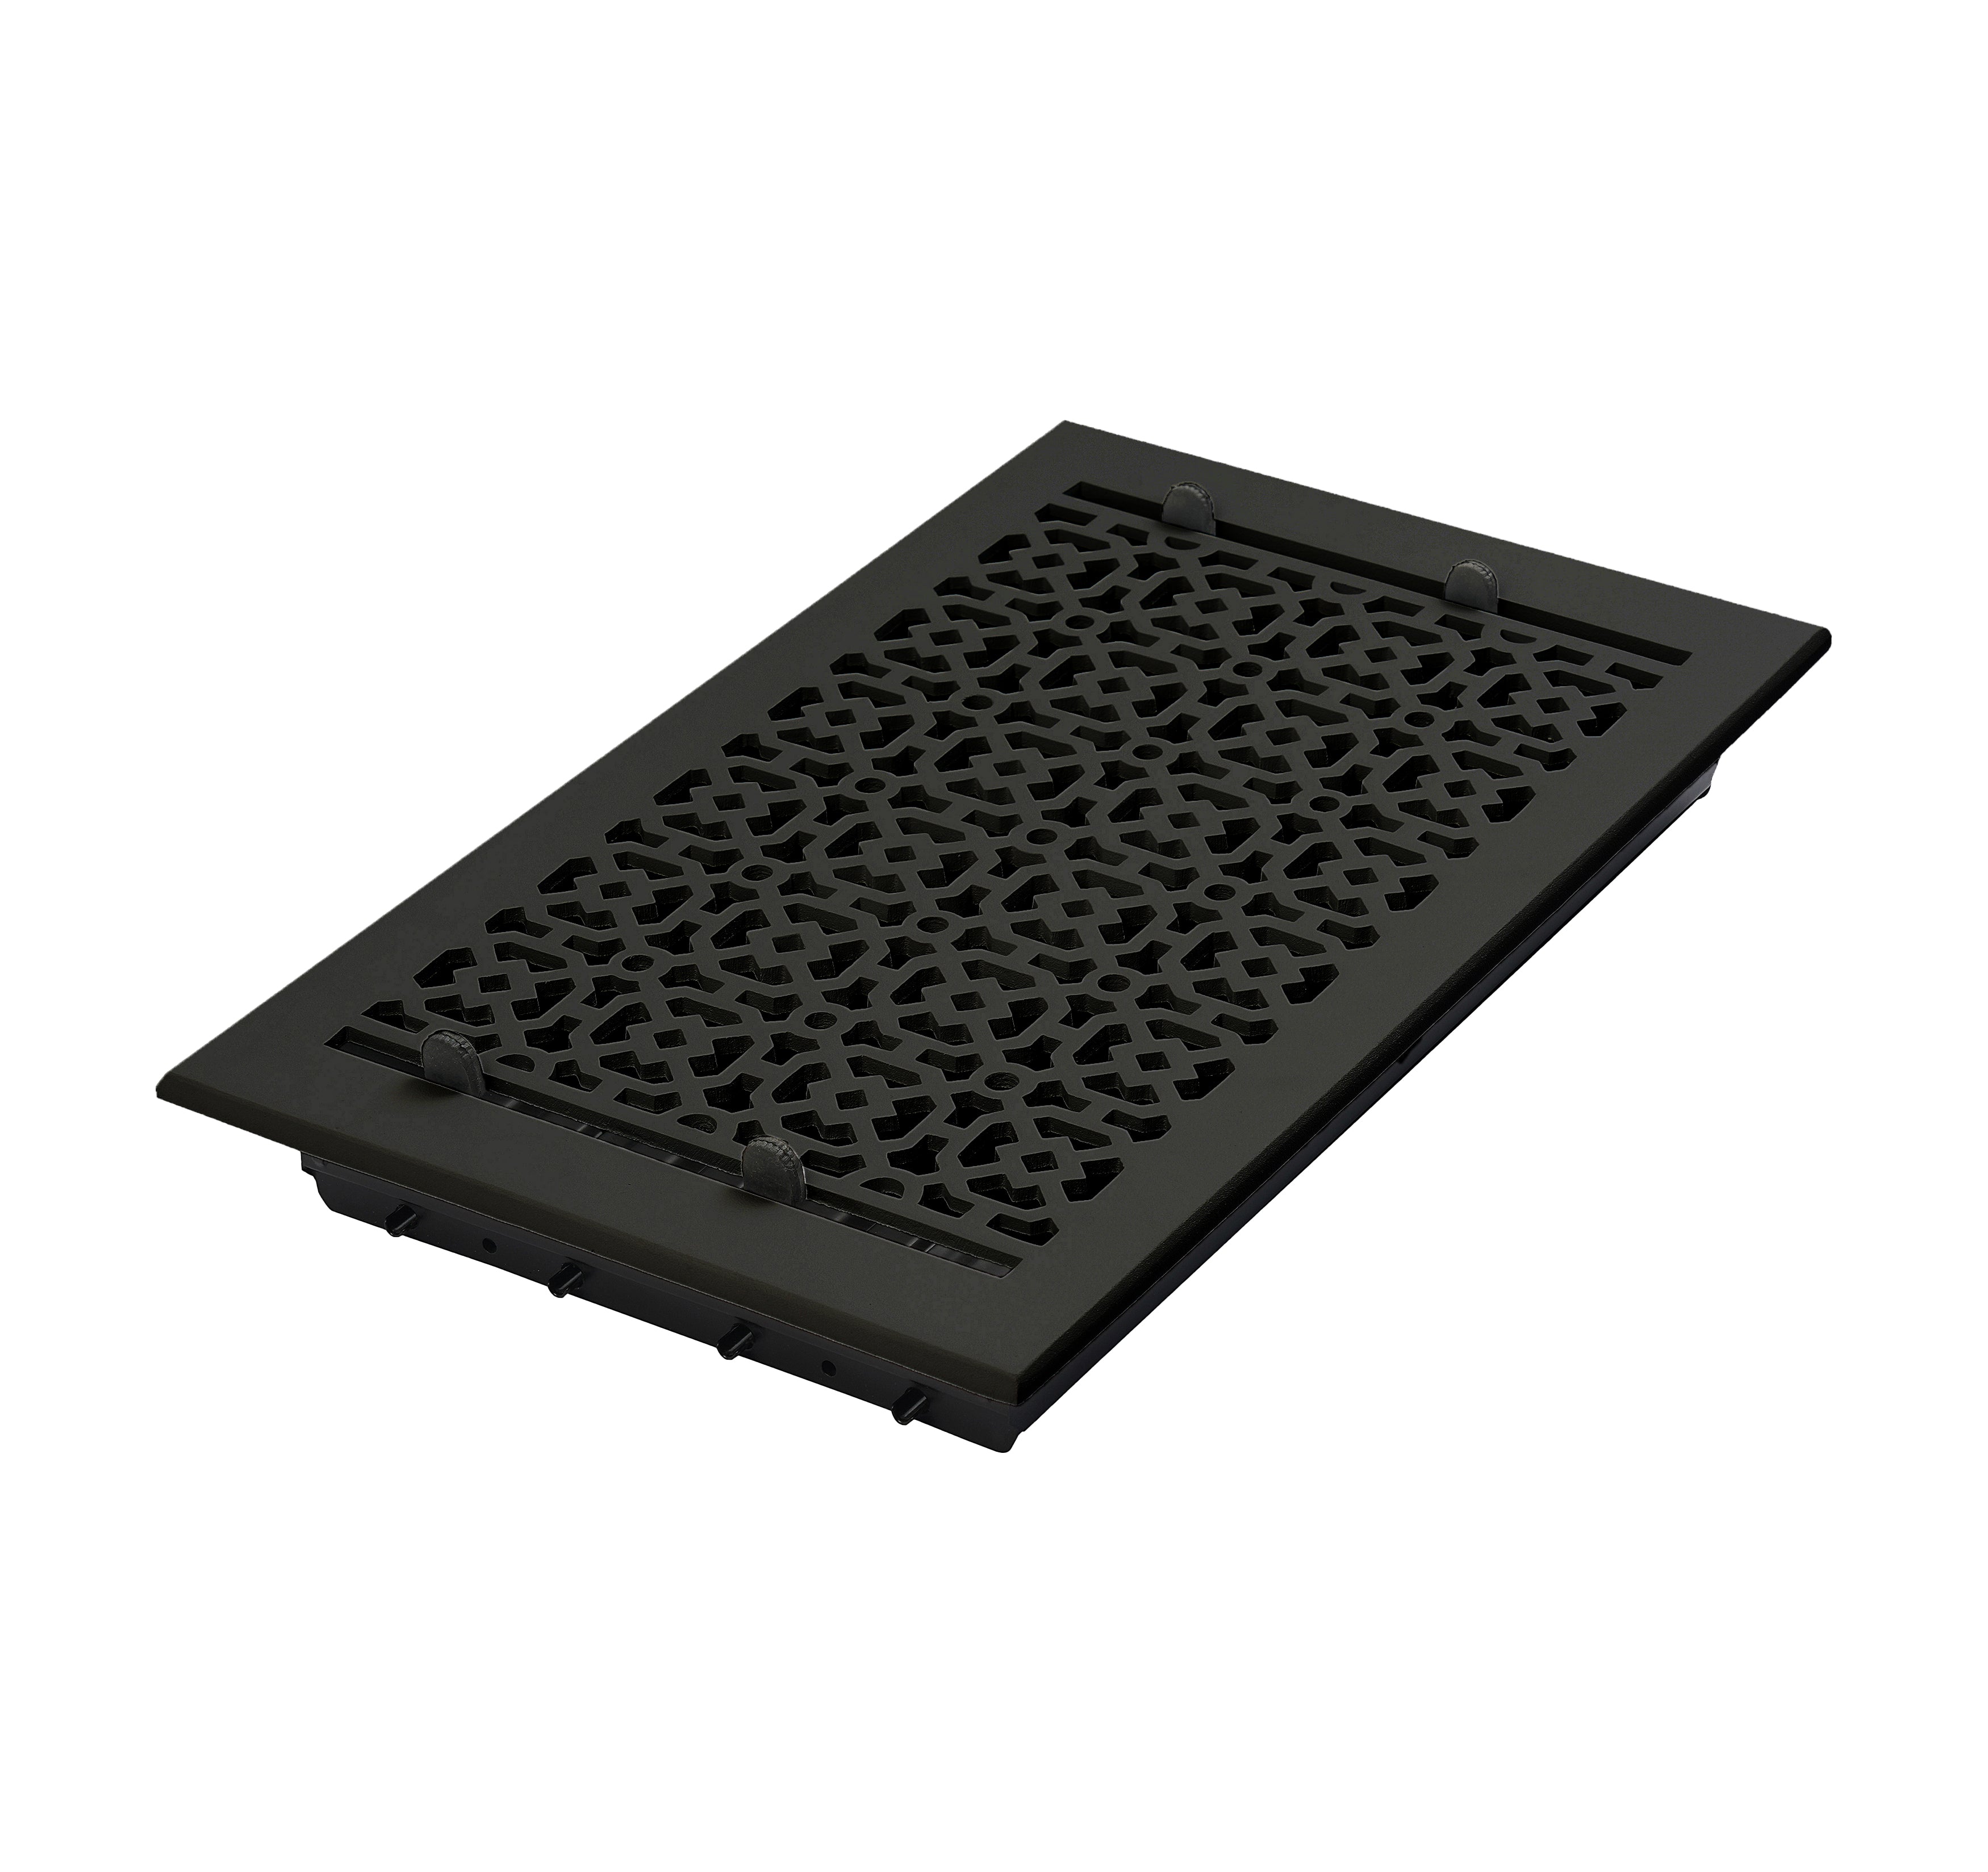 Achtek Air Supply Vent 8"x 14" Duct Opening (Overall 9-1/2"x 15-3/4") Solid Cast Aluminium Register Cover | Powder Coated